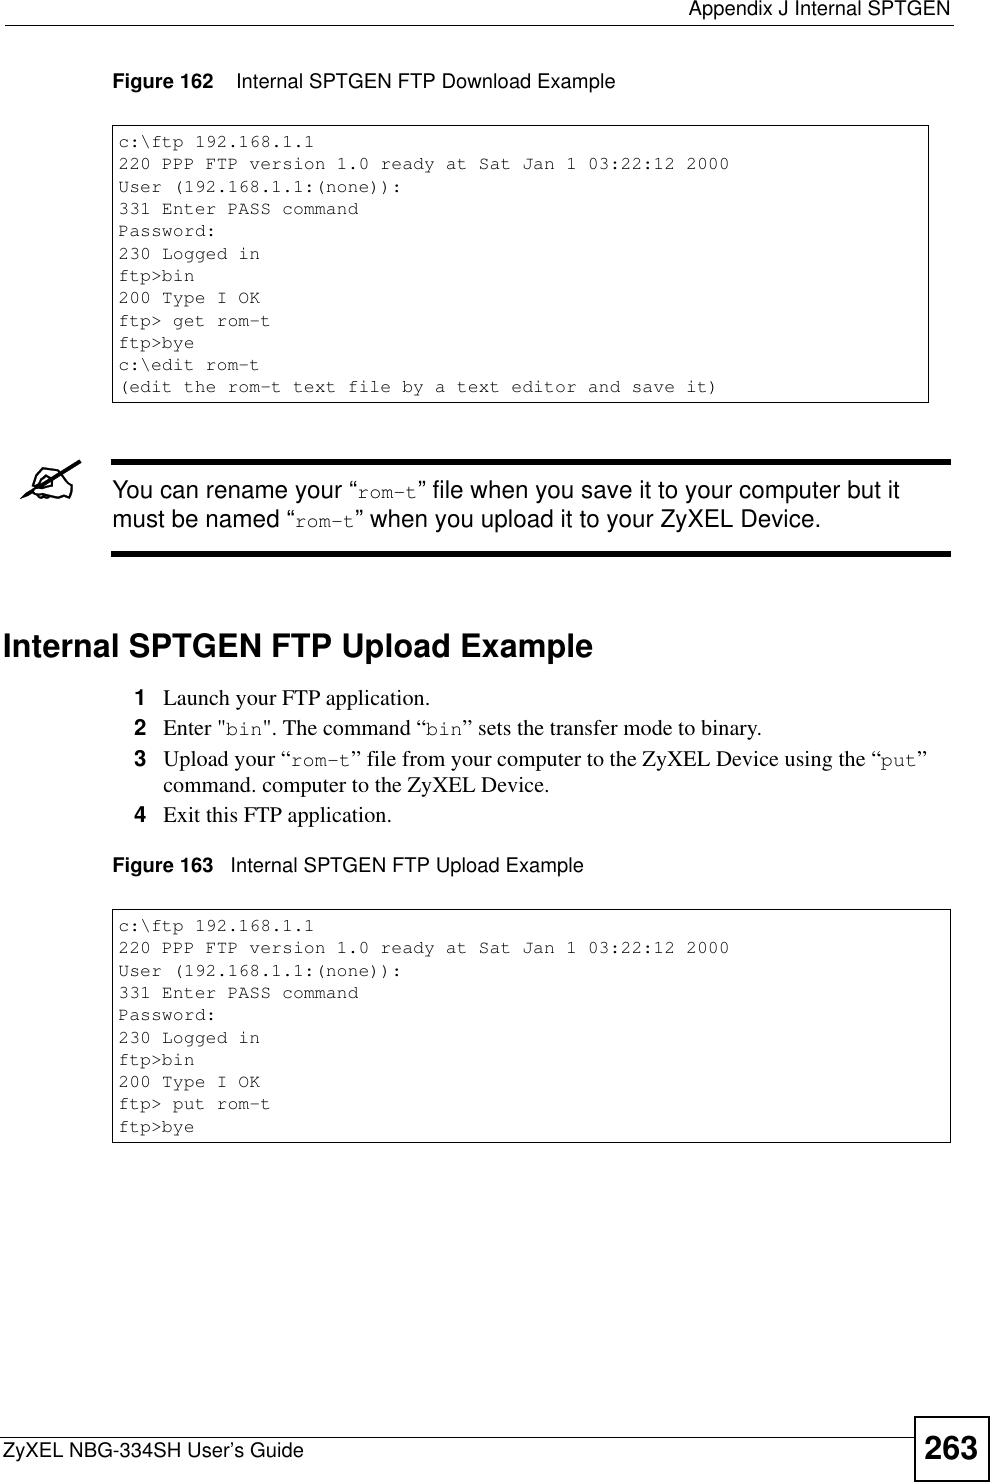  Appendix J Internal SPTGENZyXEL NBG-334SH User’s Guide 263Figure 162    Internal SPTGEN FTP Download Example&quot;You can rename your “rom-t” file when you save it to your computer but it must be named “rom-t” when you upload it to your ZyXEL Device.Internal SPTGEN FTP Upload Example1Launch your FTP application.2Enter &quot;bin&quot;. The command “bin” sets the transfer mode to binary.3Upload your “rom-t” file from your computer to the ZyXEL Device using the “put”command. computer to the ZyXEL Device.4Exit this FTP application.Figure 163   Internal SPTGEN FTP Upload Examplec:\ftp 192.168.1.1220 PPP FTP version 1.0 ready at Sat Jan 1 03:22:12 2000User (192.168.1.1:(none)):331 Enter PASS commandPassword:230 Logged inftp&gt;bin200 Type I OKftp&gt; get rom-tftp&gt;byec:\edit rom-t(edit the rom-t text file by a text editor and save it)c:\ftp 192.168.1.1220 PPP FTP version 1.0 ready at Sat Jan 1 03:22:12 2000User (192.168.1.1:(none)):331 Enter PASS commandPassword:230 Logged inftp&gt;bin200 Type I OKftp&gt; put rom-tftp&gt;bye